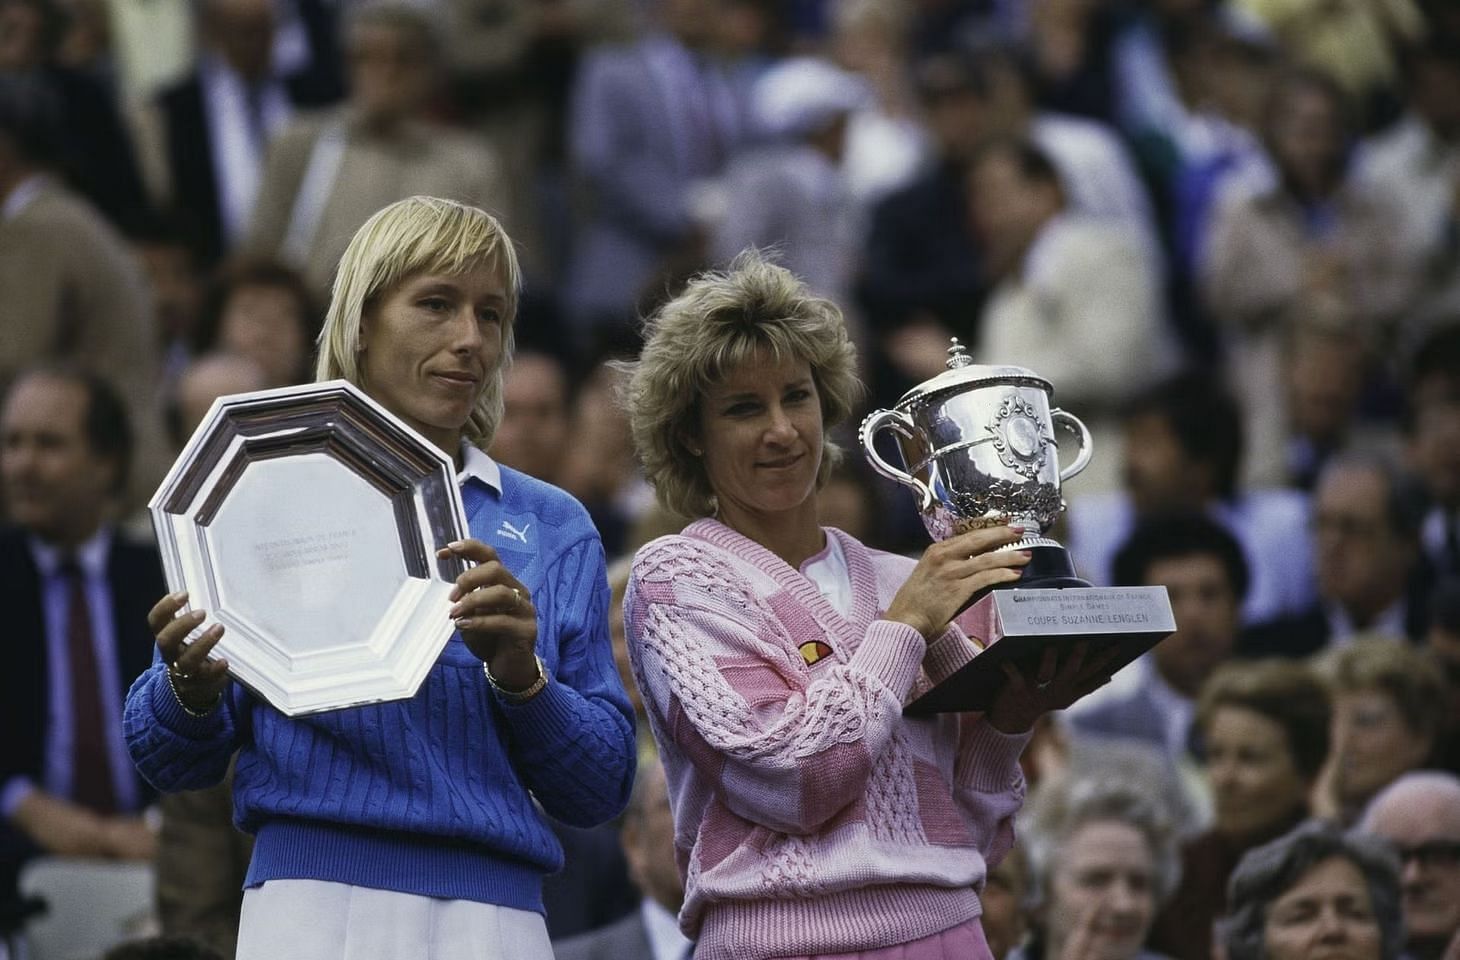 Evert and Navratilova played 80 matches against each other